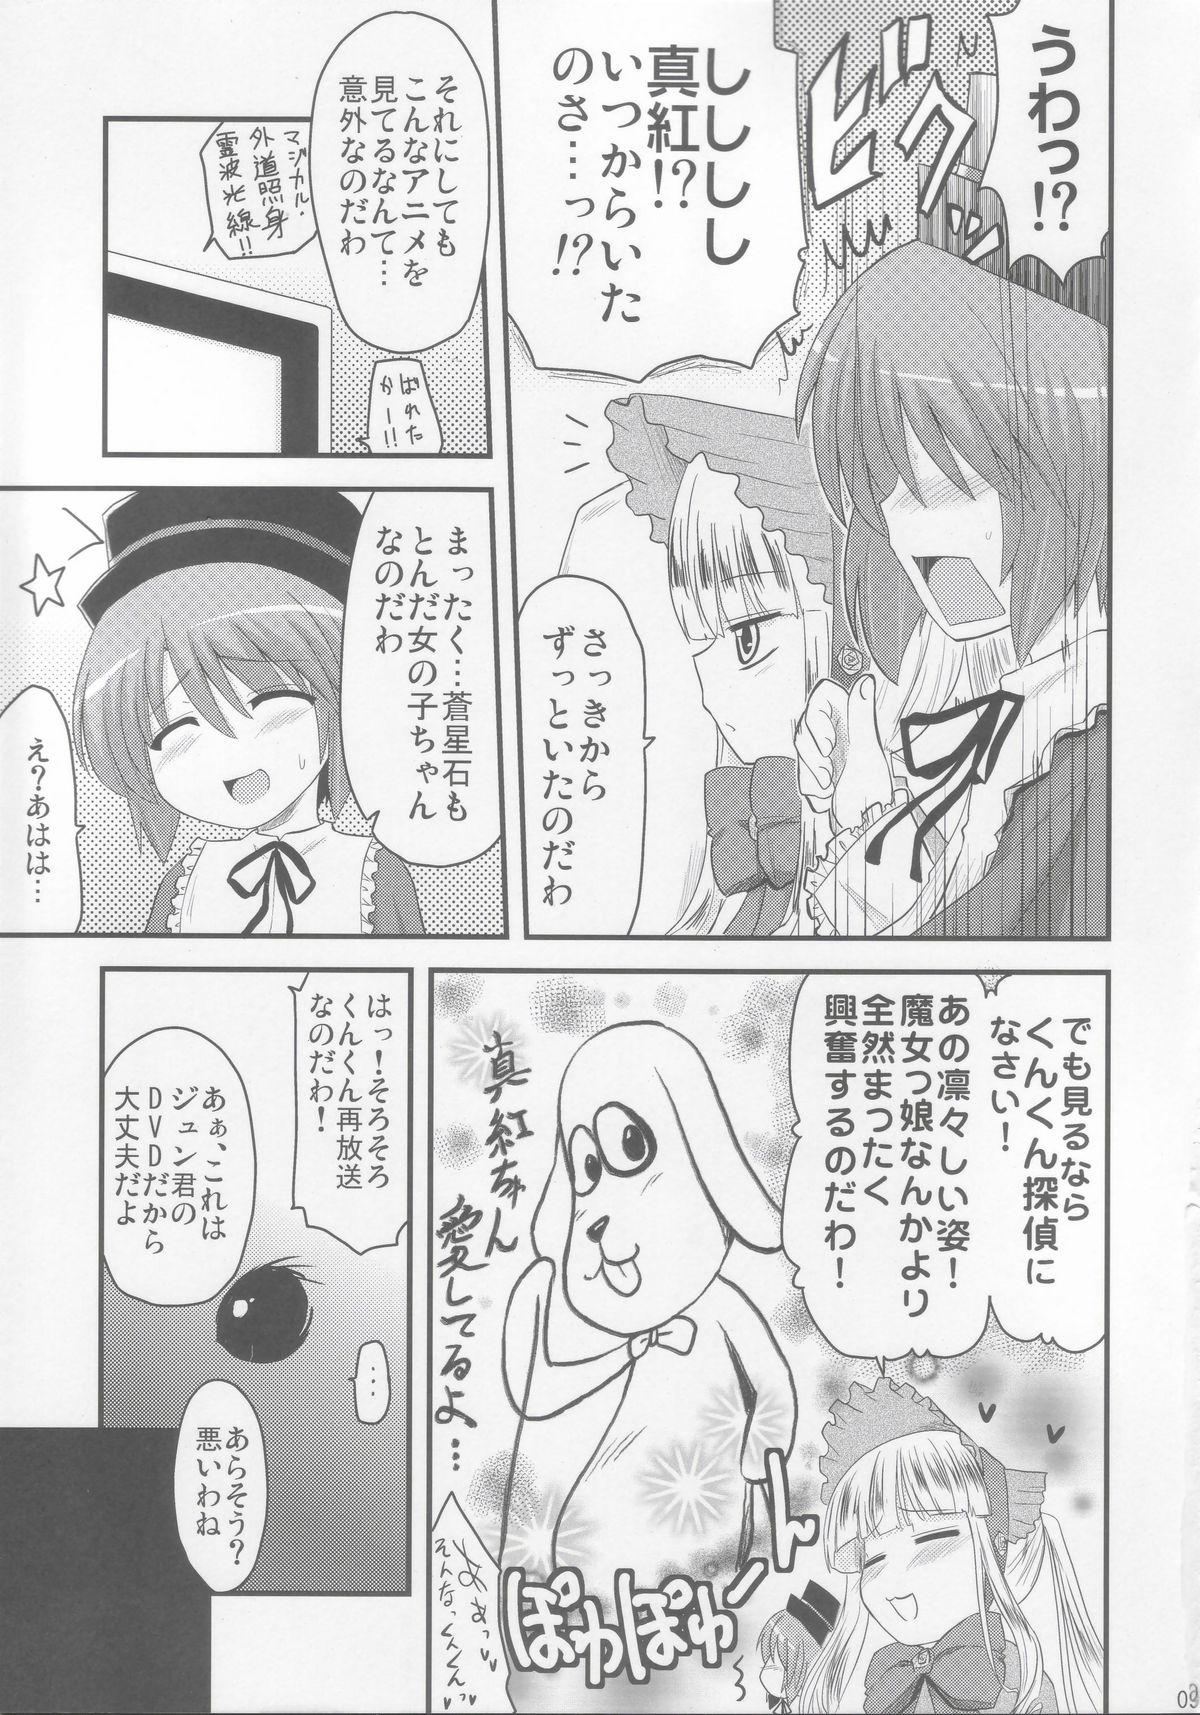 Lesbos Kyo Ao - Rozen maiden Private Sex - Page 8